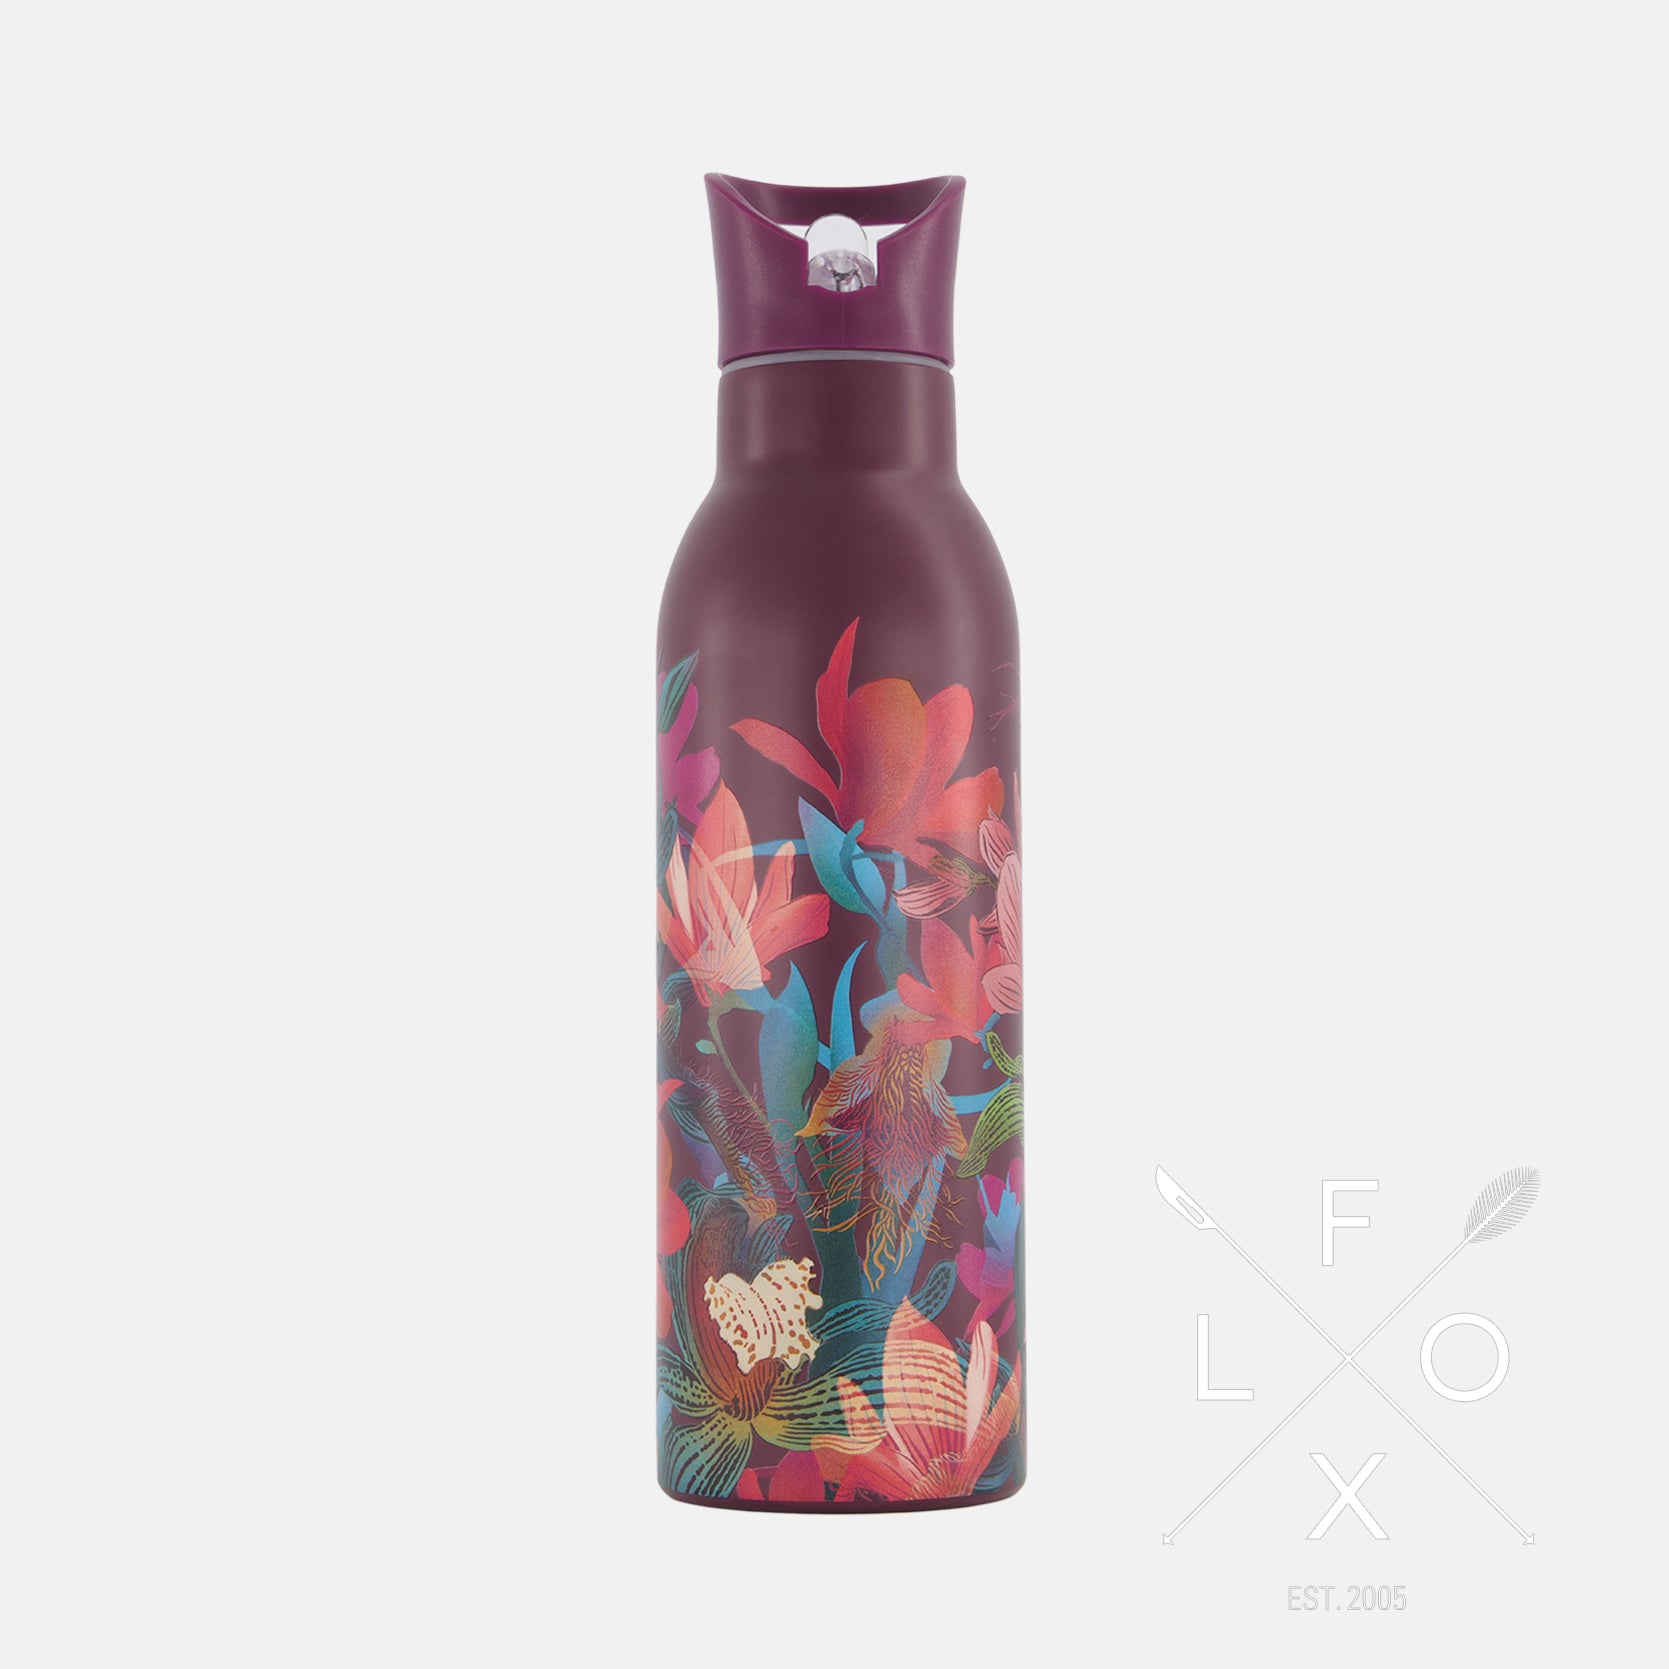 Burgundy drink bottle with magnolia and orchid print with matching box by Flox design.